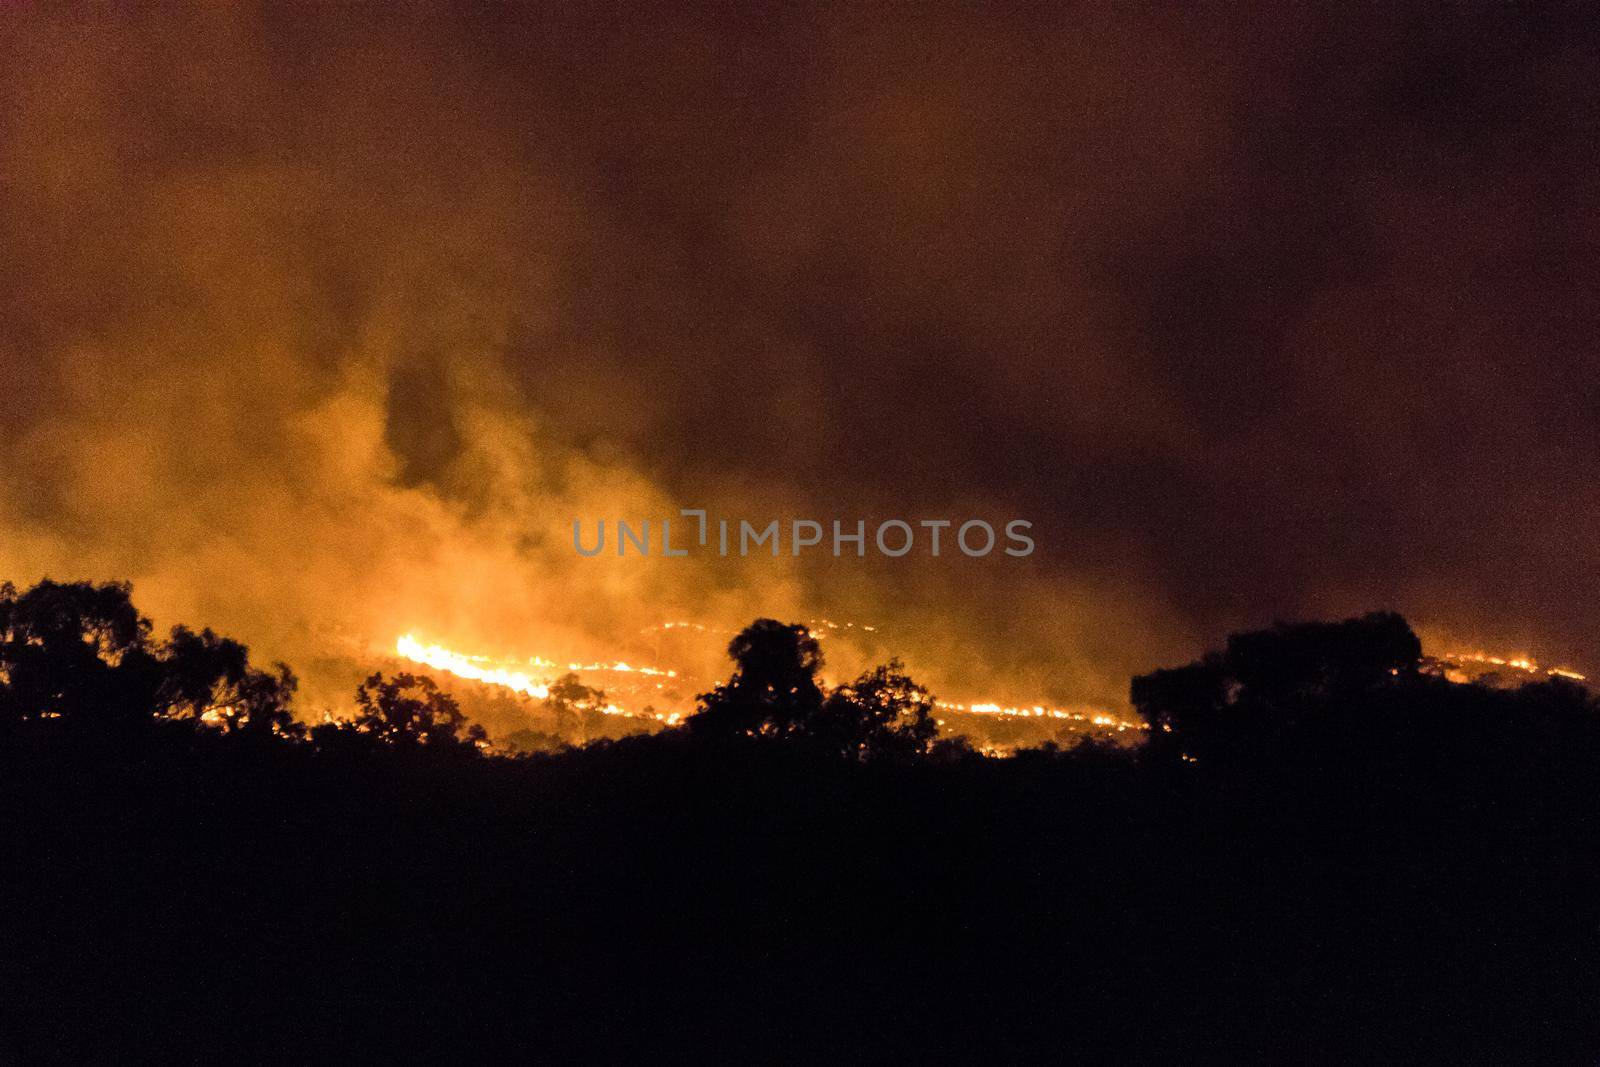 australian bushfire of a forrest at Night, nothern territory